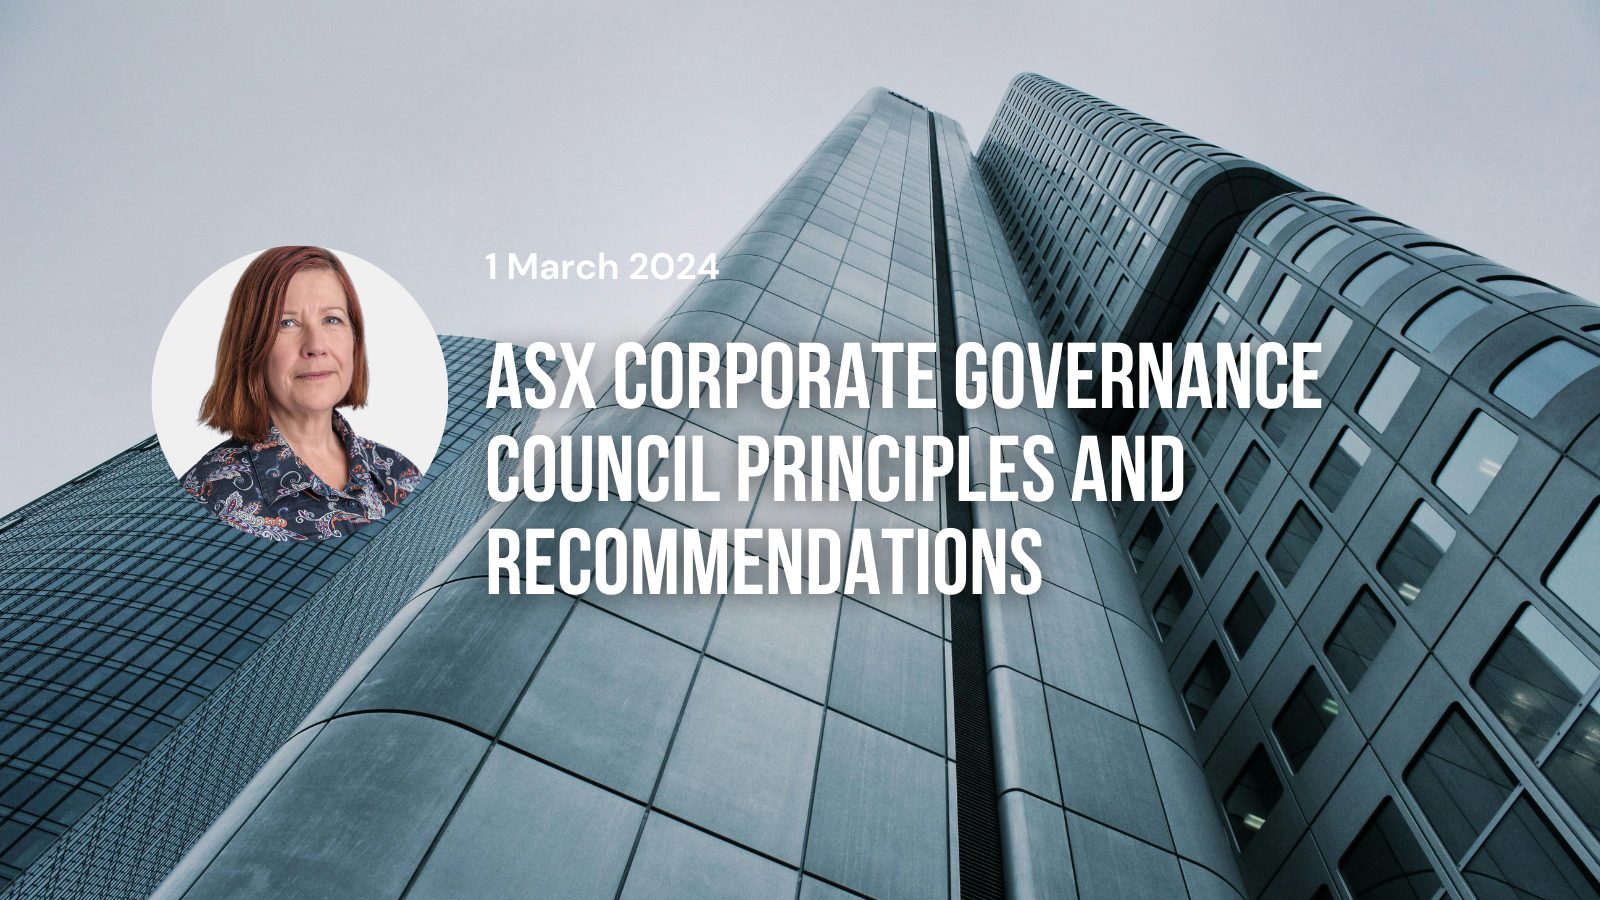 ASX Corporate Governance Council Principles and Recommendations